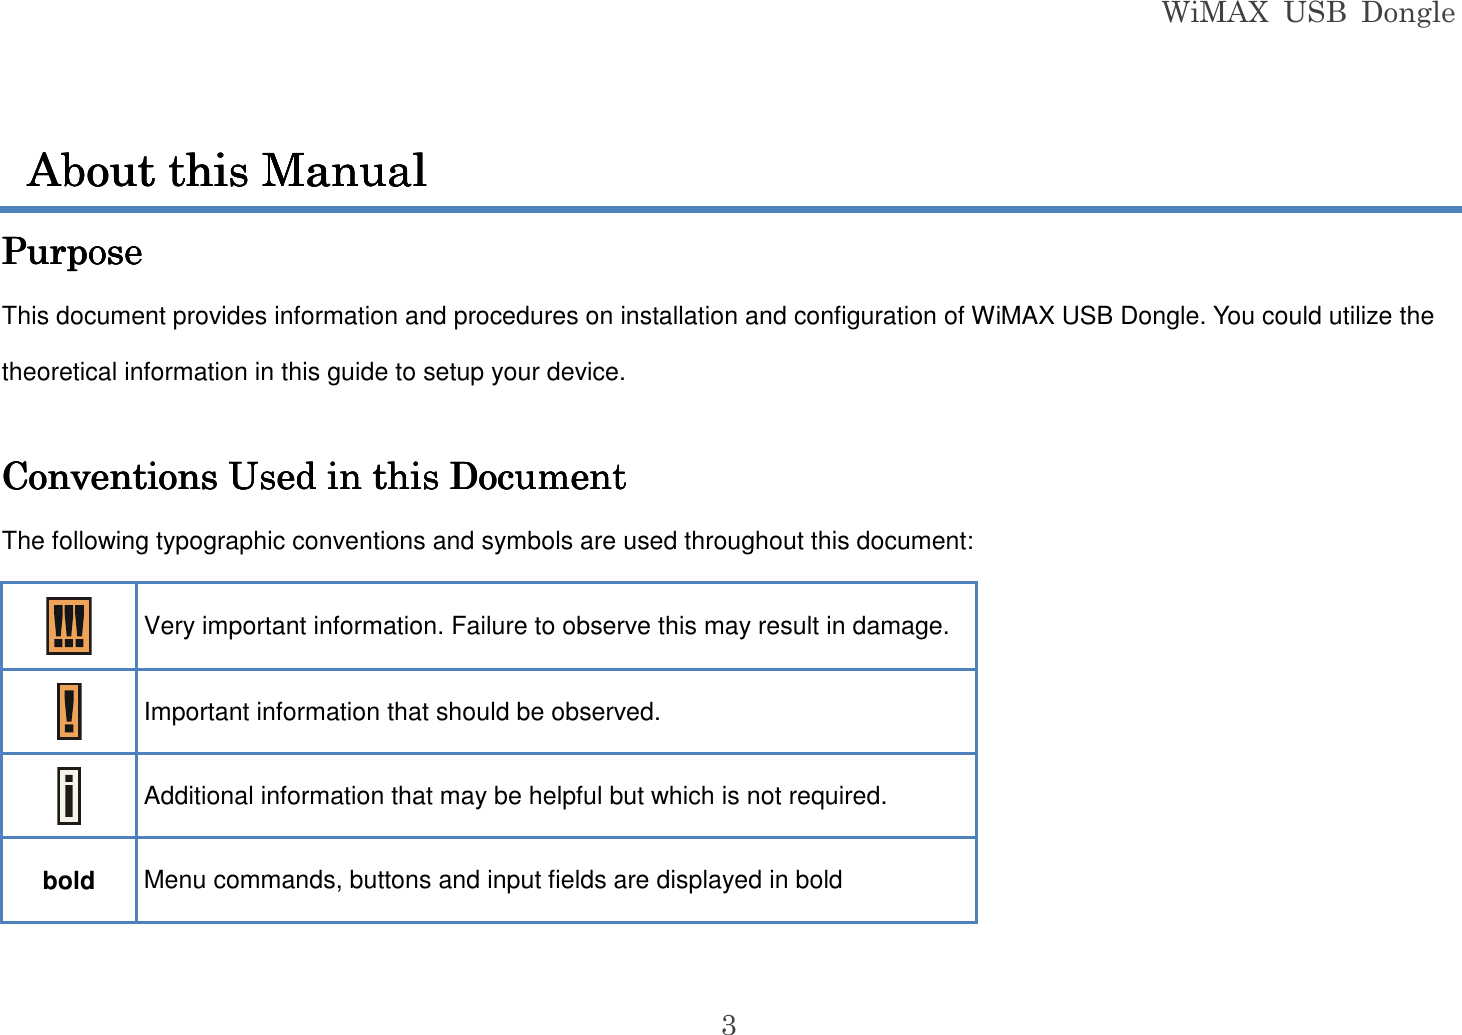 WiMAX  USB  Dongle  3  PurposePurposePurposePurpose    This document provides information and procedures on installation and configuration of WiMAX USB Dongle. You could utilize the theoretical information in this guide to setup your device.  Conventions Used in this DocumentConventions Used in this DocumentConventions Used in this DocumentConventions Used in this Document    The following typographic conventions and symbols are used throughout this document:  Very important information. Failure to observe this may result in damage.  Important information that should be observed.  Additional information that may be helpful but which is not required. bold  Menu commands, buttons and input fields are displayed in bold About this ManualAbout this ManualAbout this ManualAbout this Manual    